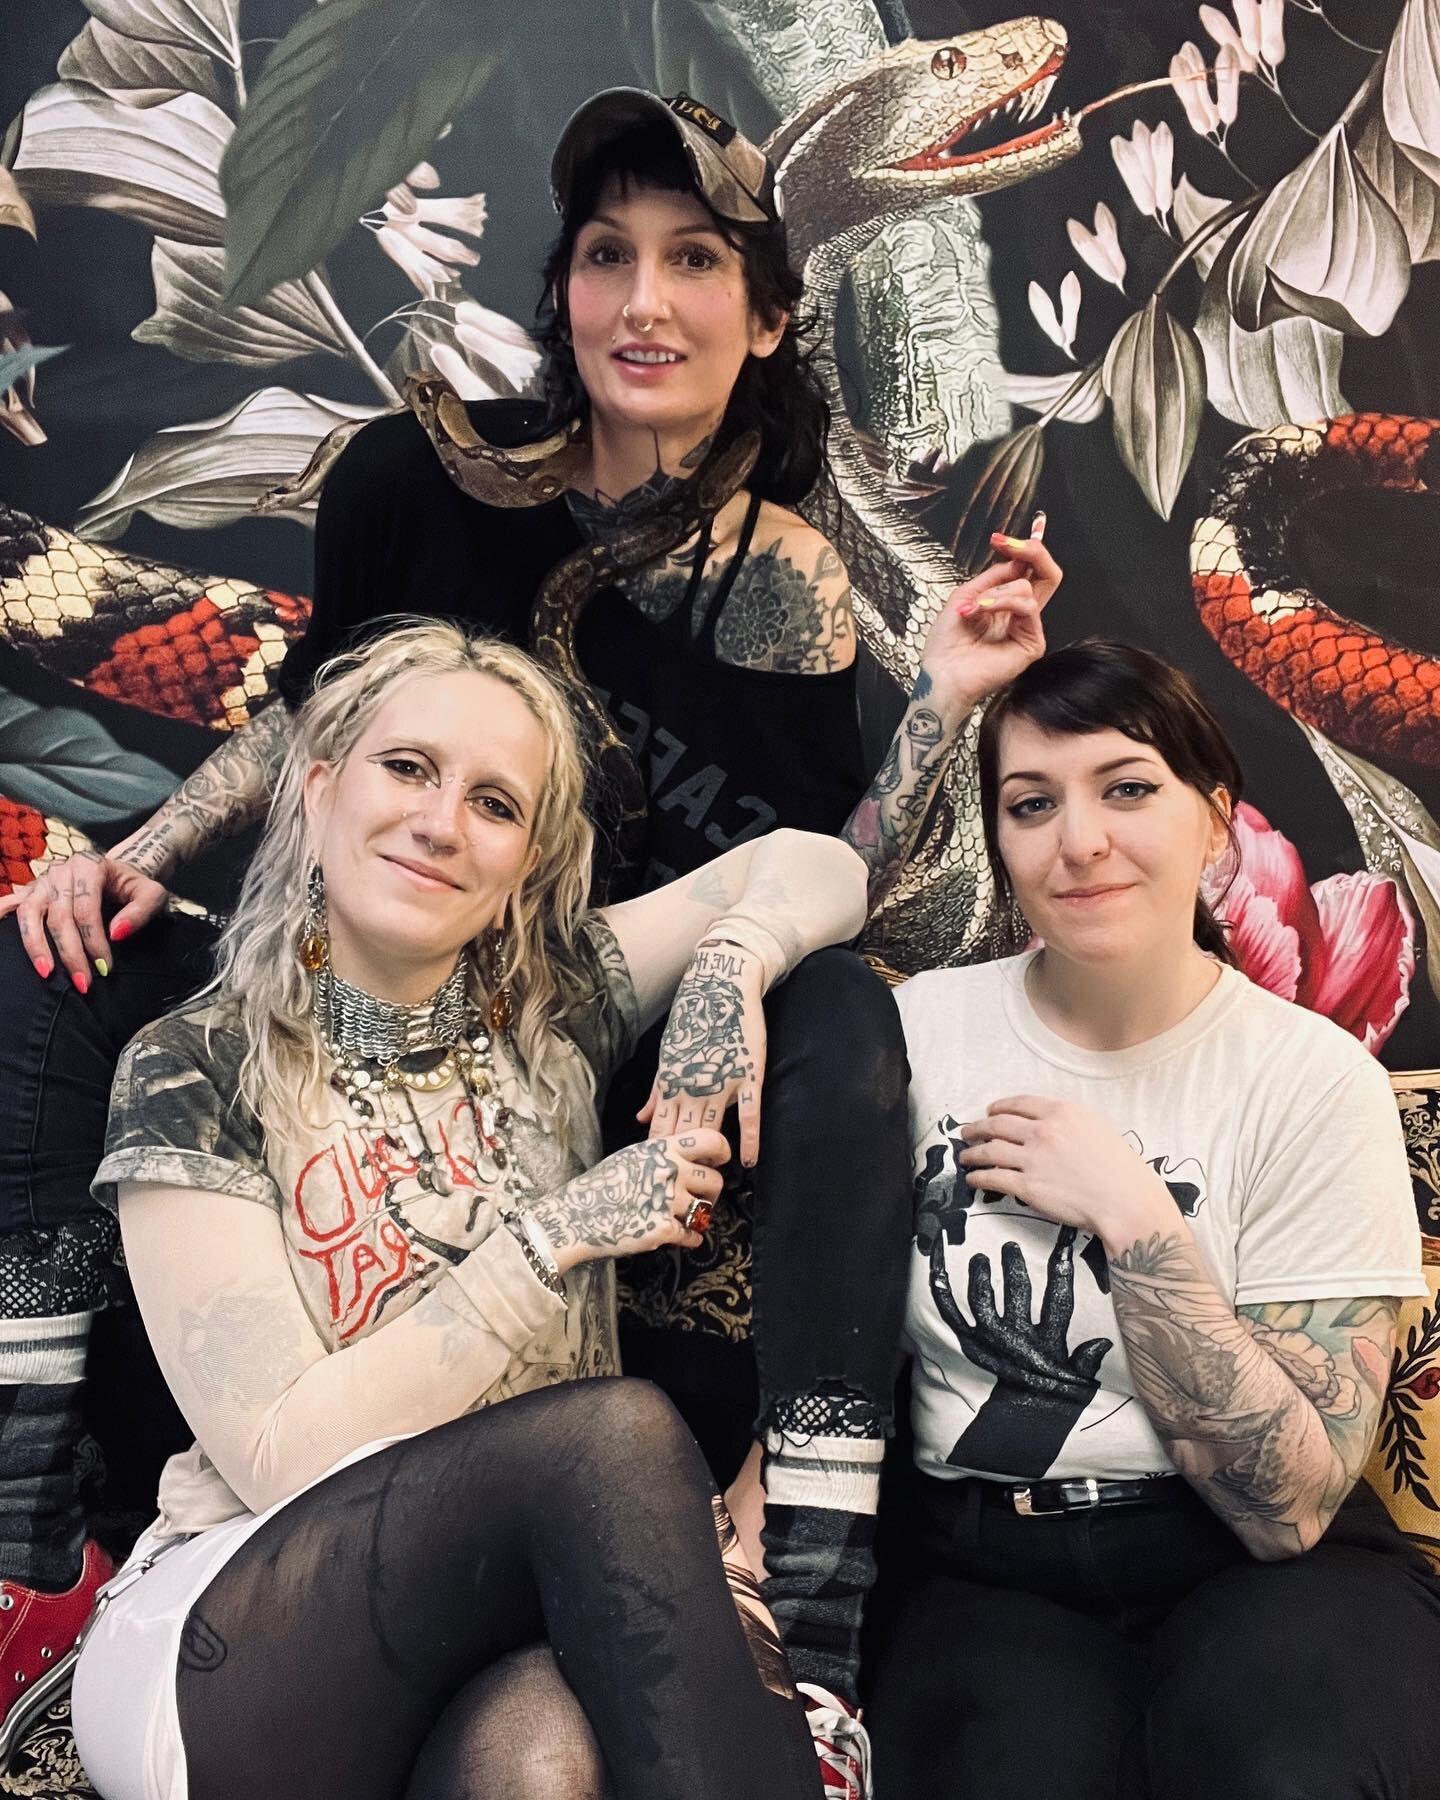 Three tattooer babes and a snake 🐍 how perfect 💅🏼